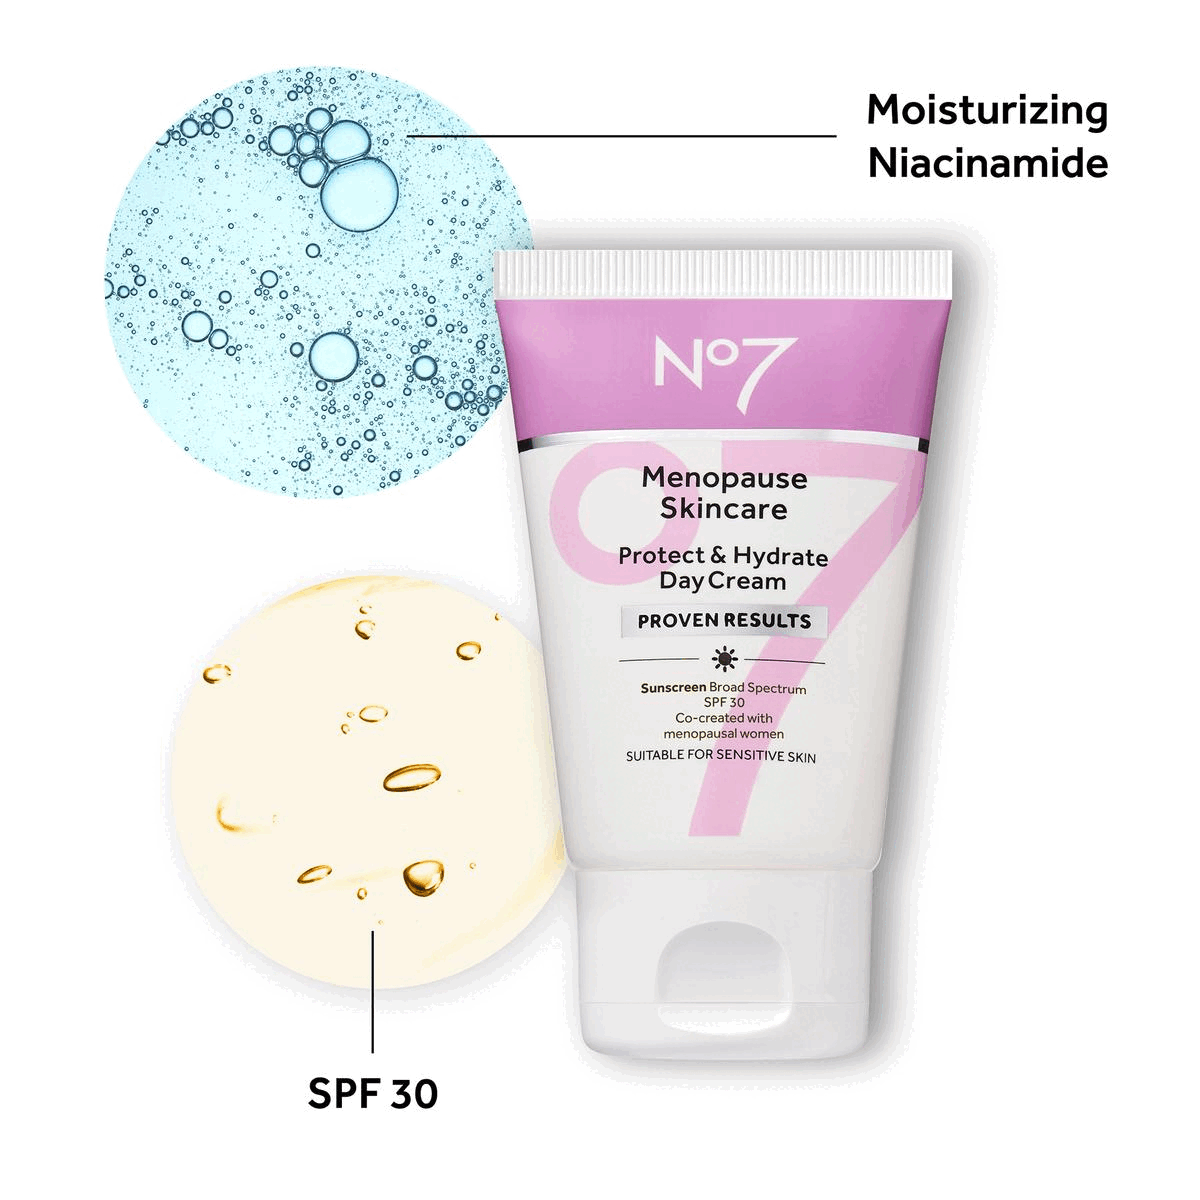 Moisturizing niacinamide.SPF 30, Instantly smoother, more even-looking skin* * Consumer study.